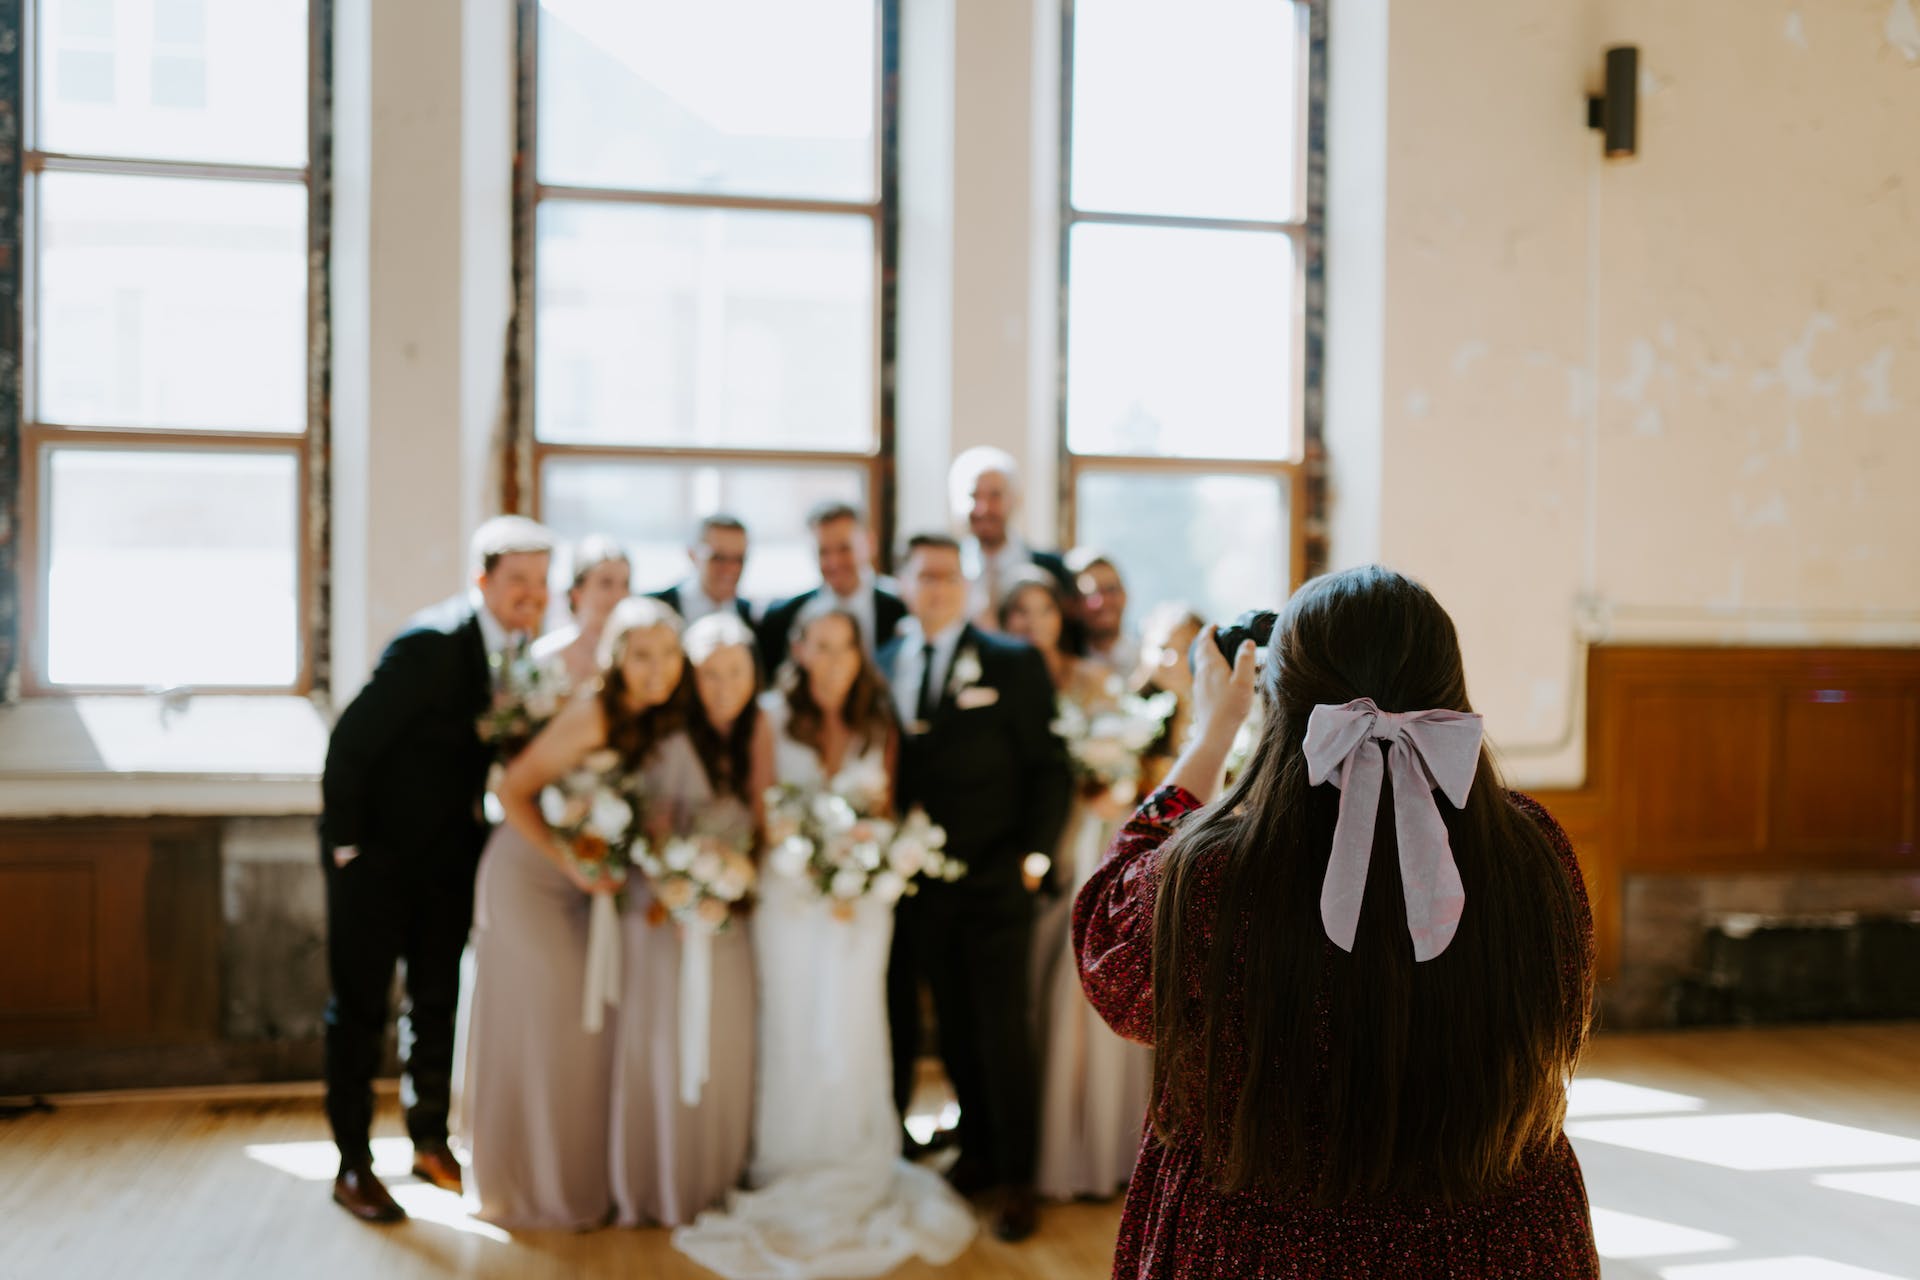 A photographer taking a group photo at a wedding | Source: Pexels